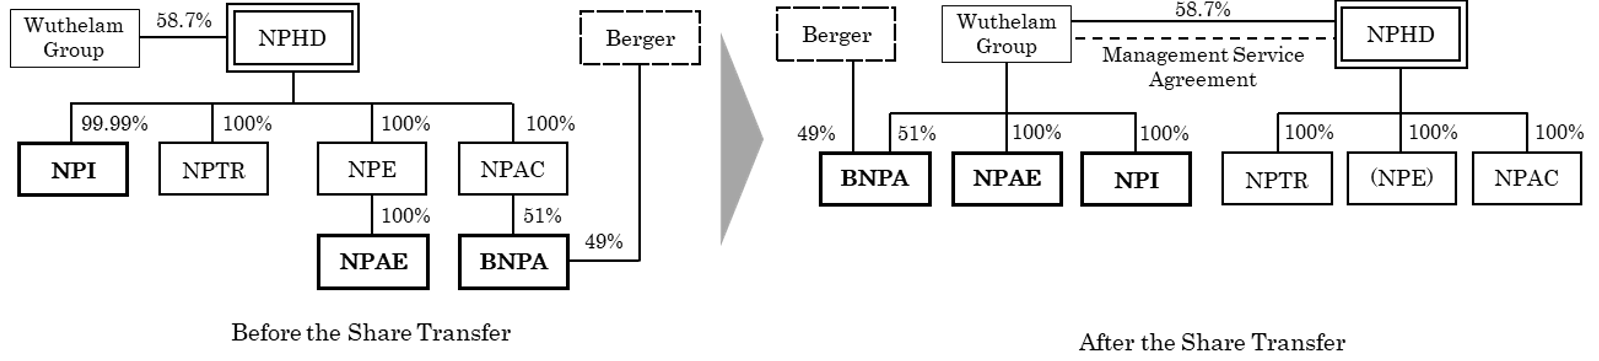 Change in capital relationship upon the Share Transfer